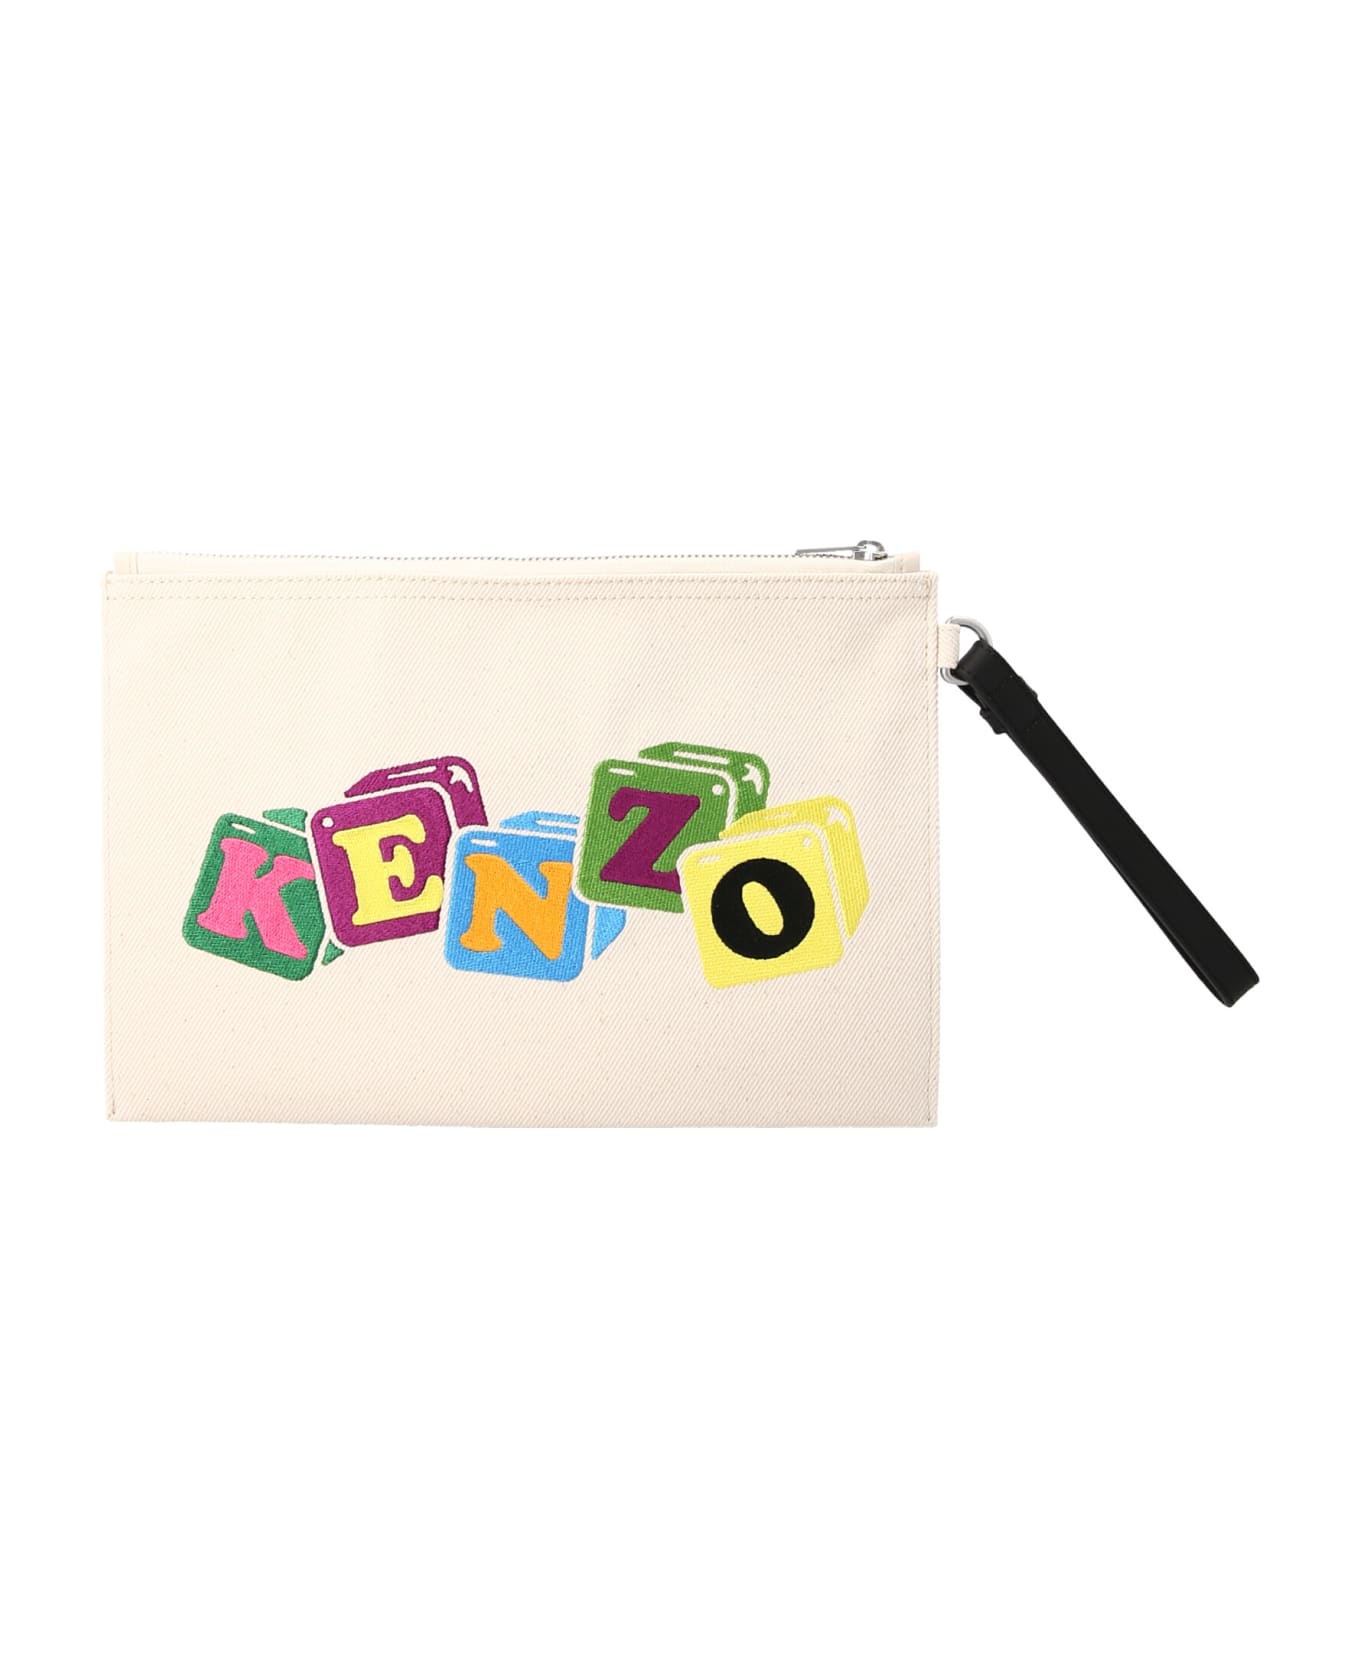 Kenzo Embroidered Clutch - Beige クラッチバッグ